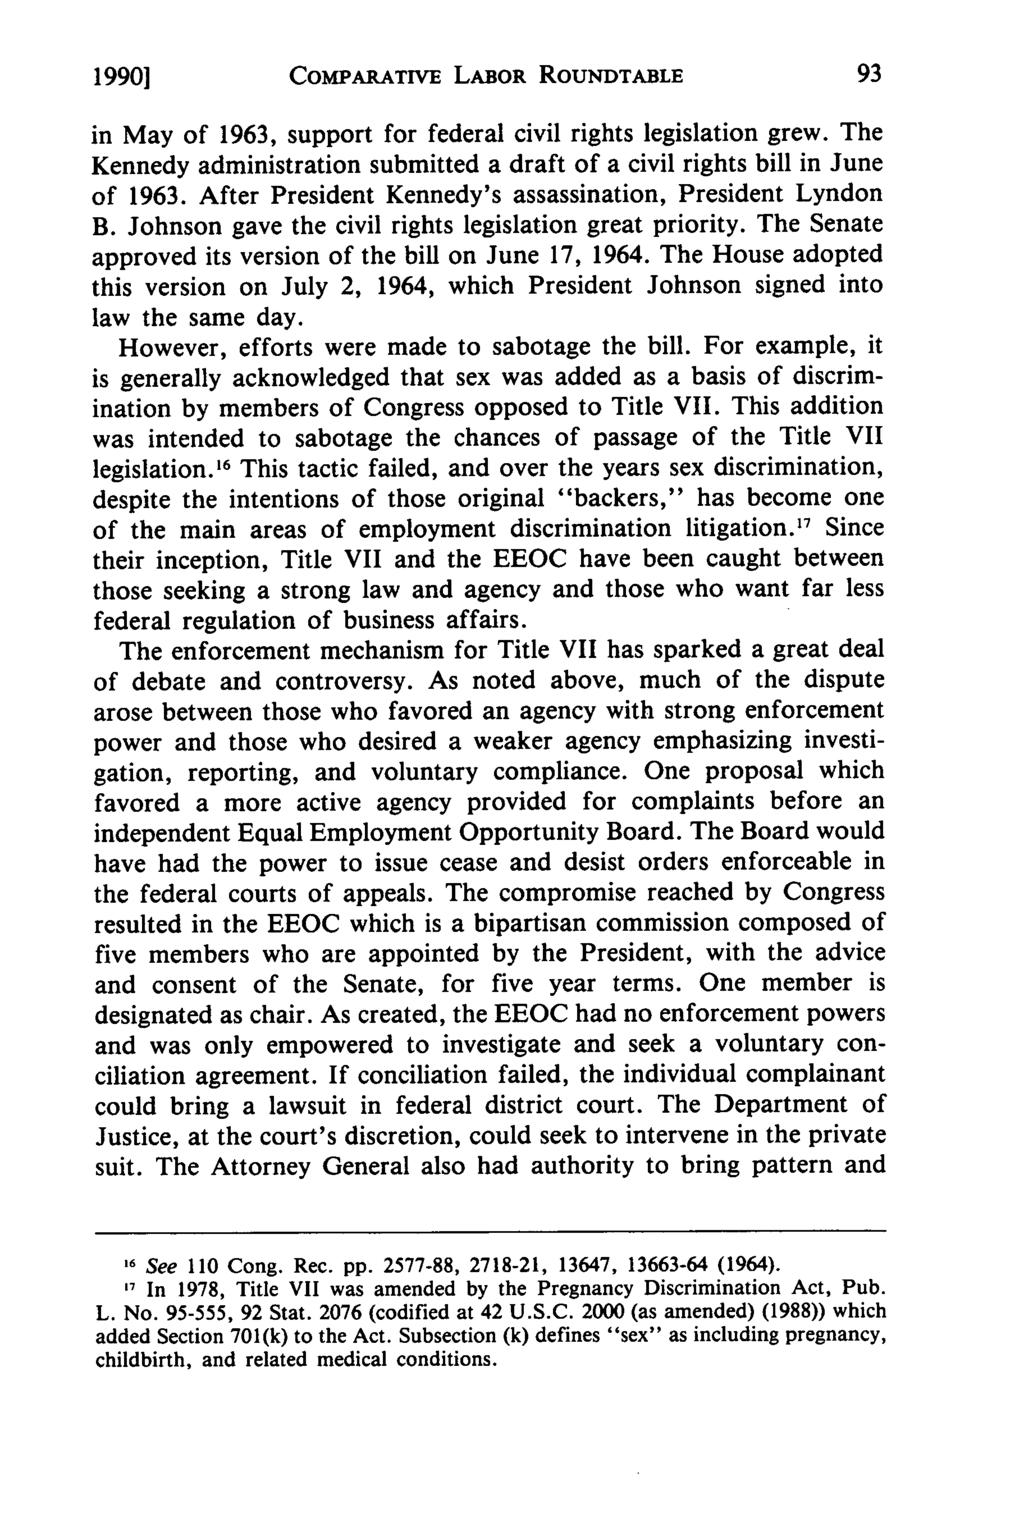 19901 COMPARATIVE LABOR ROUNDTABLE in May of 1963, support for federal civil rights legislation grew. The Kennedy administration submitted a draft of a civil rights bill in June of 1963.